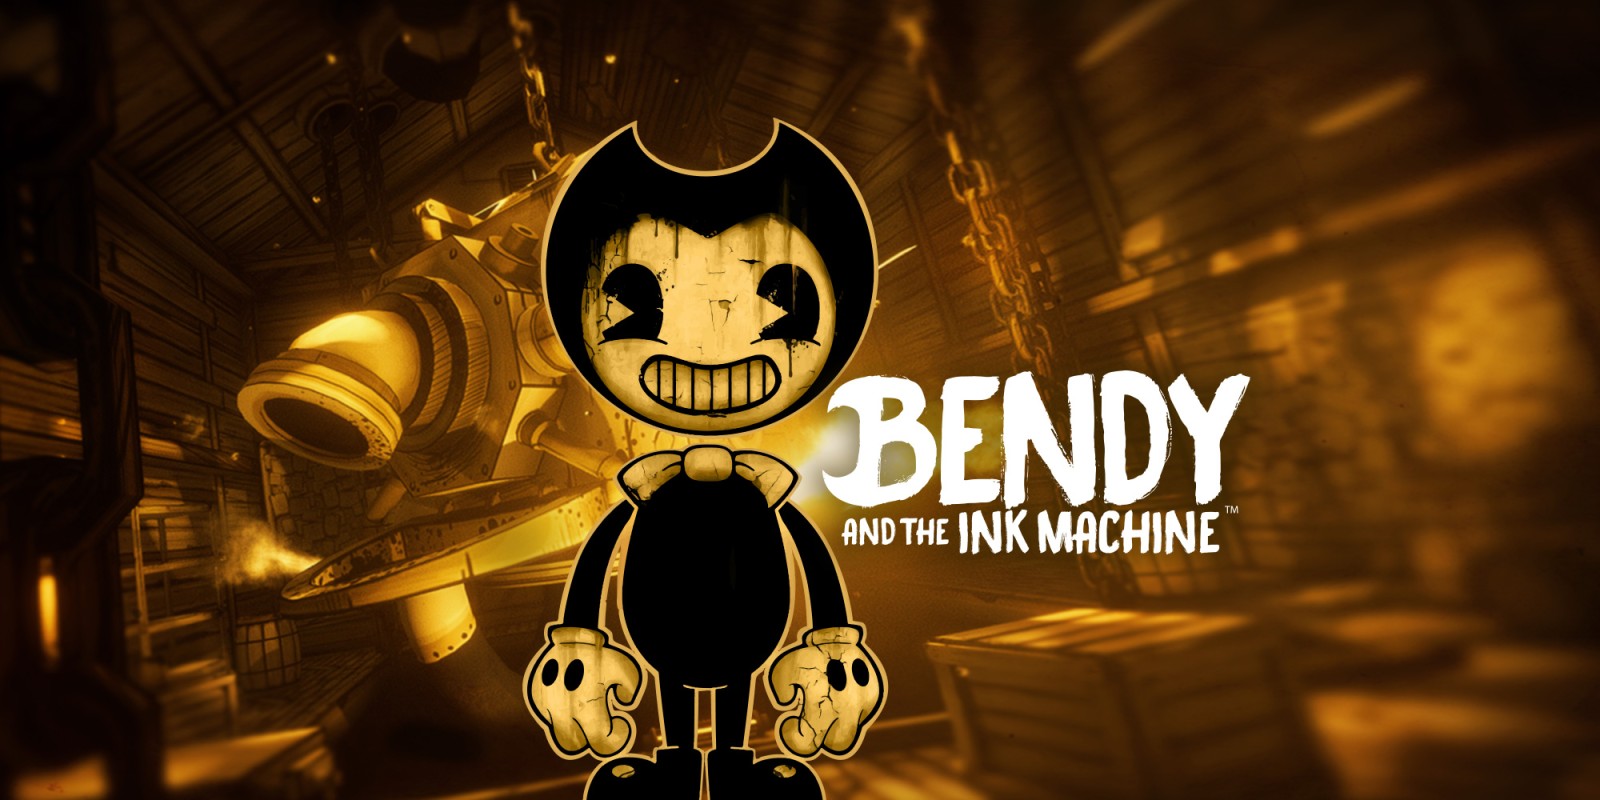 Bendy Papercraft Bendy Bendy And The Ink Machine Papercraft Pt By My